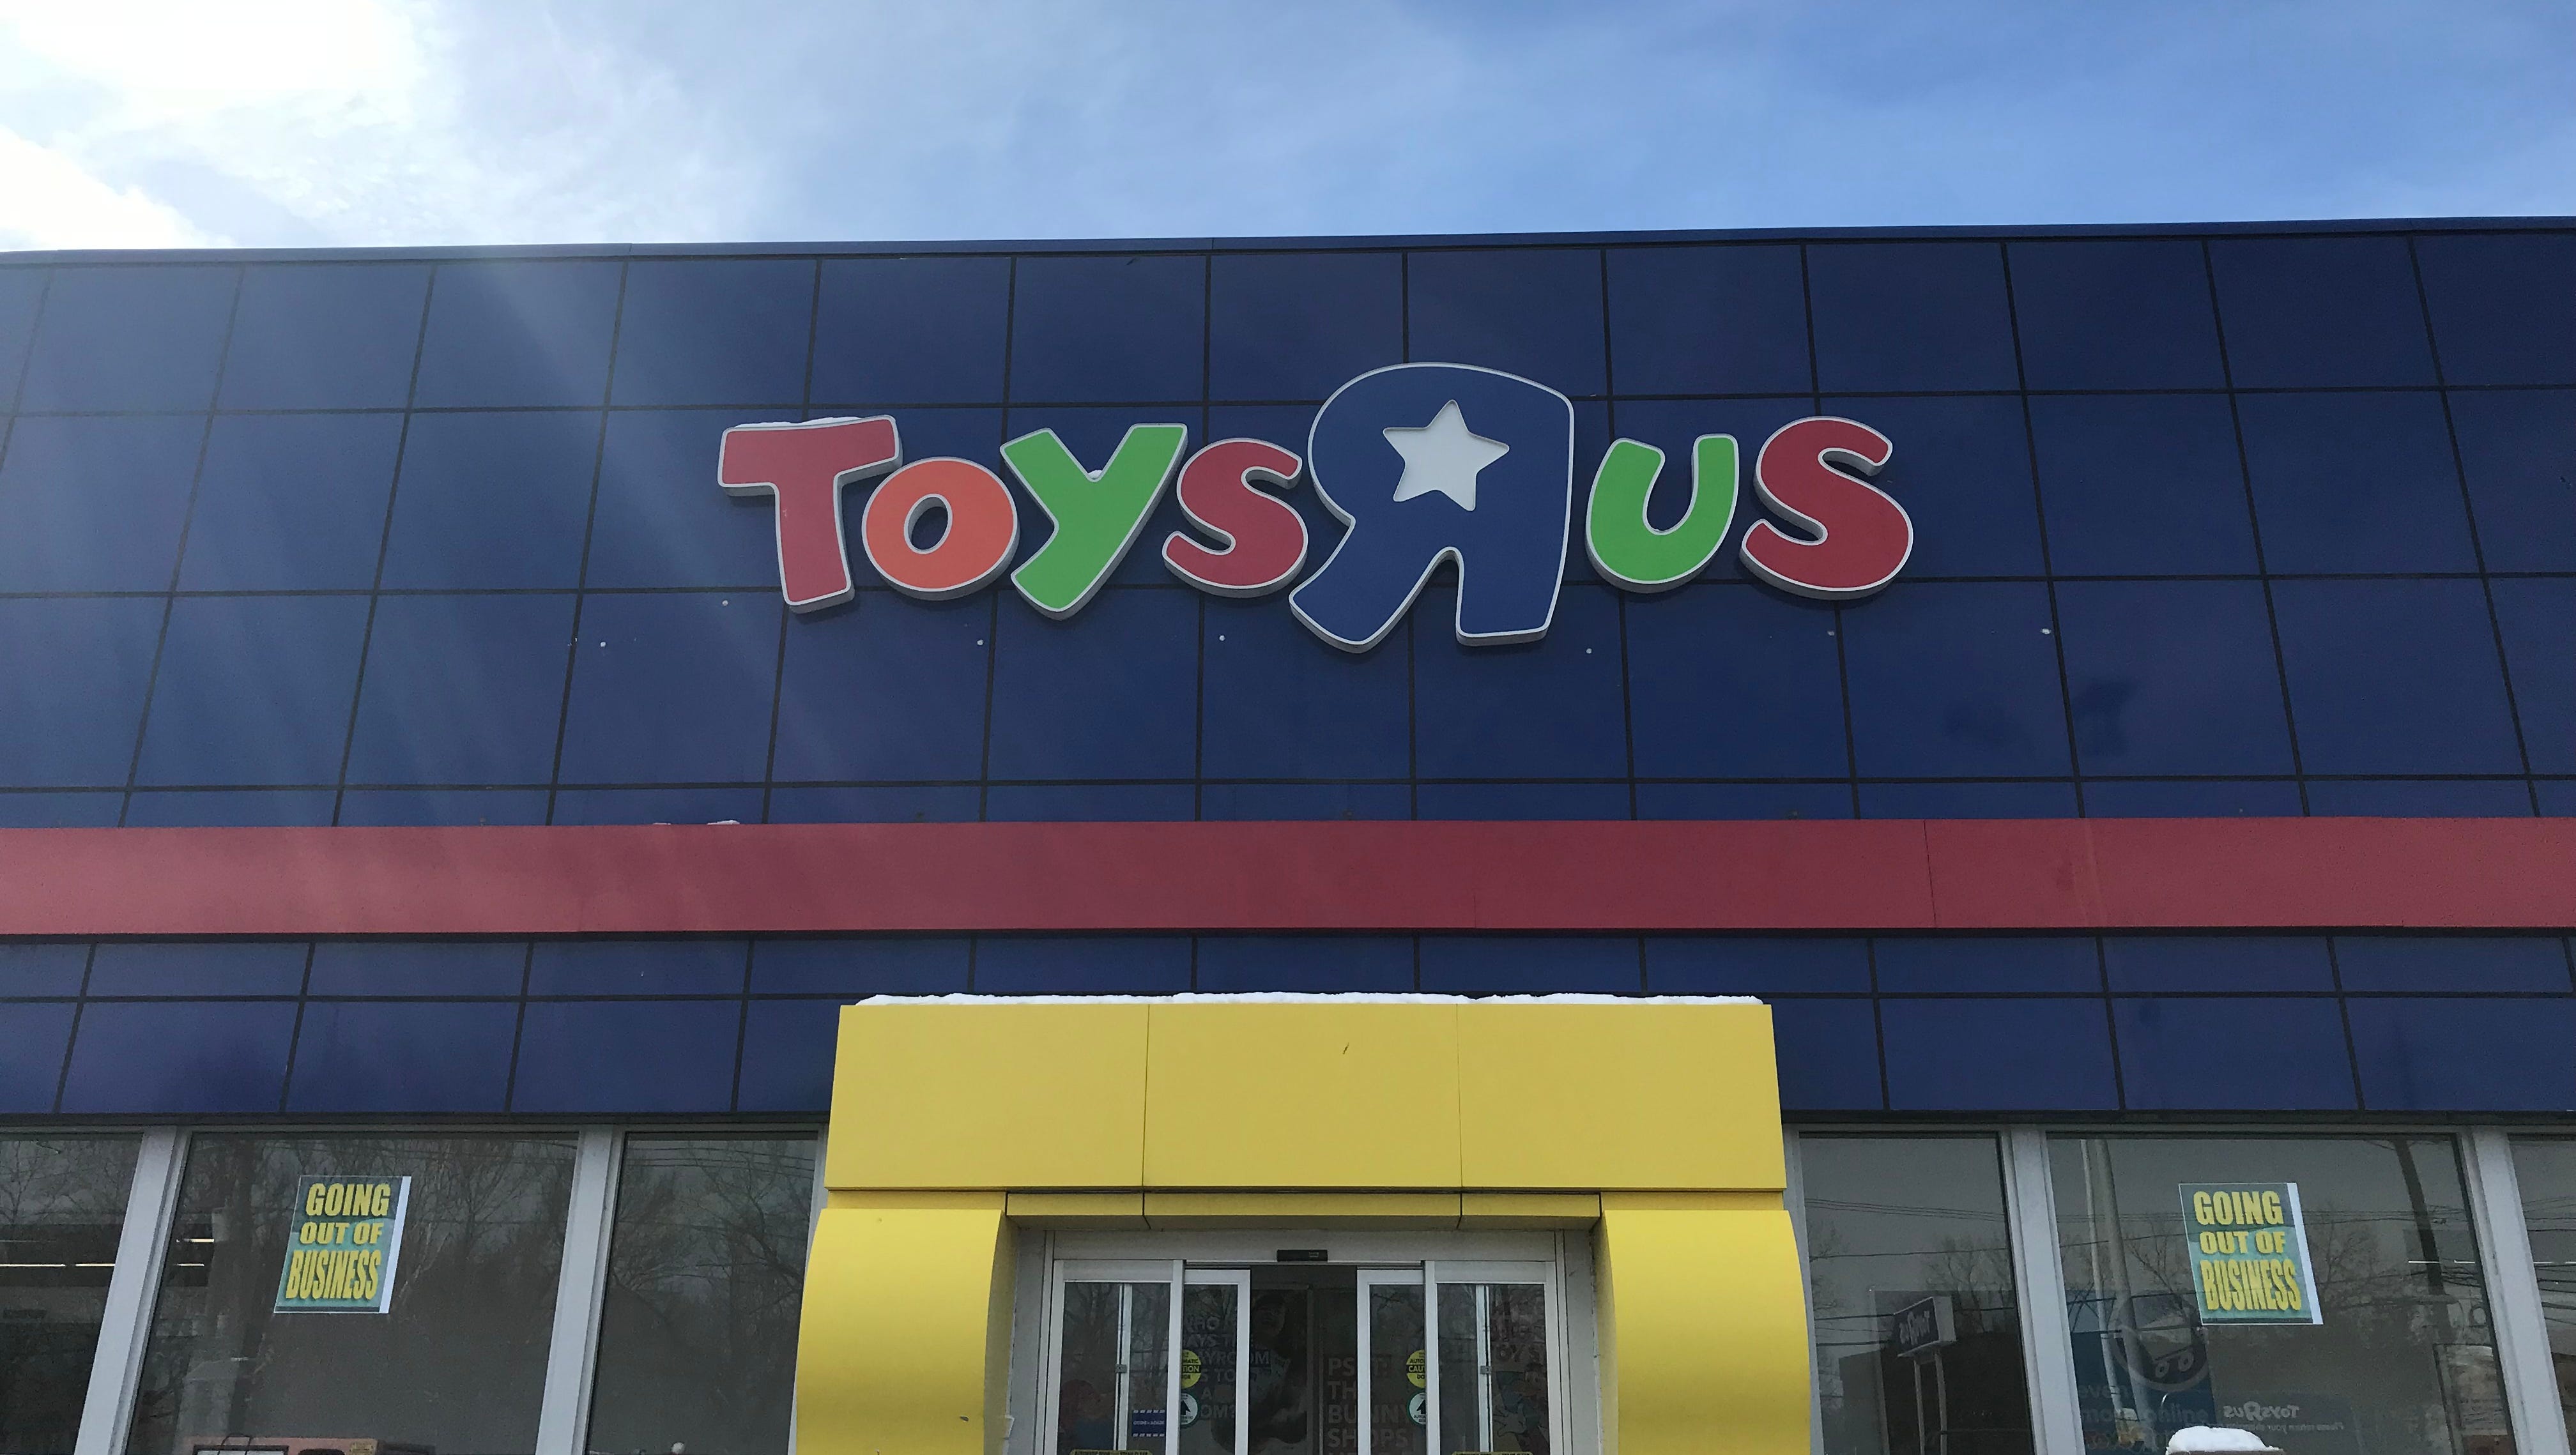 Toys R Us Rave In The Uk Stopped By London Area Police